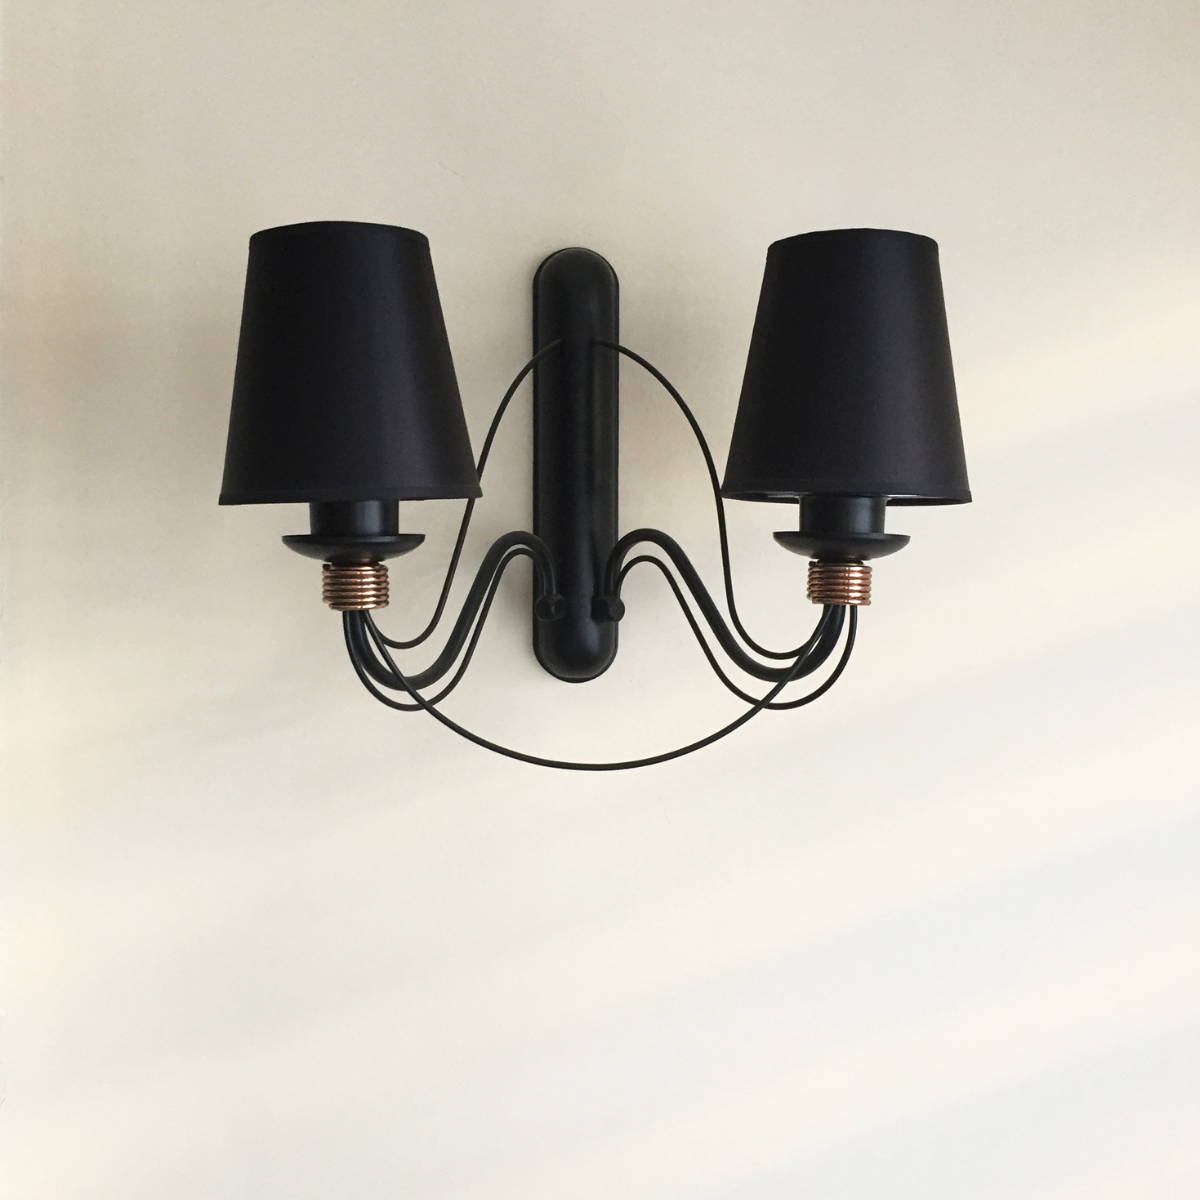 47. Elevate Your Anniversary with Iron-Inspired Wall Sconces: A Unique and Thoughtful Gift Idea